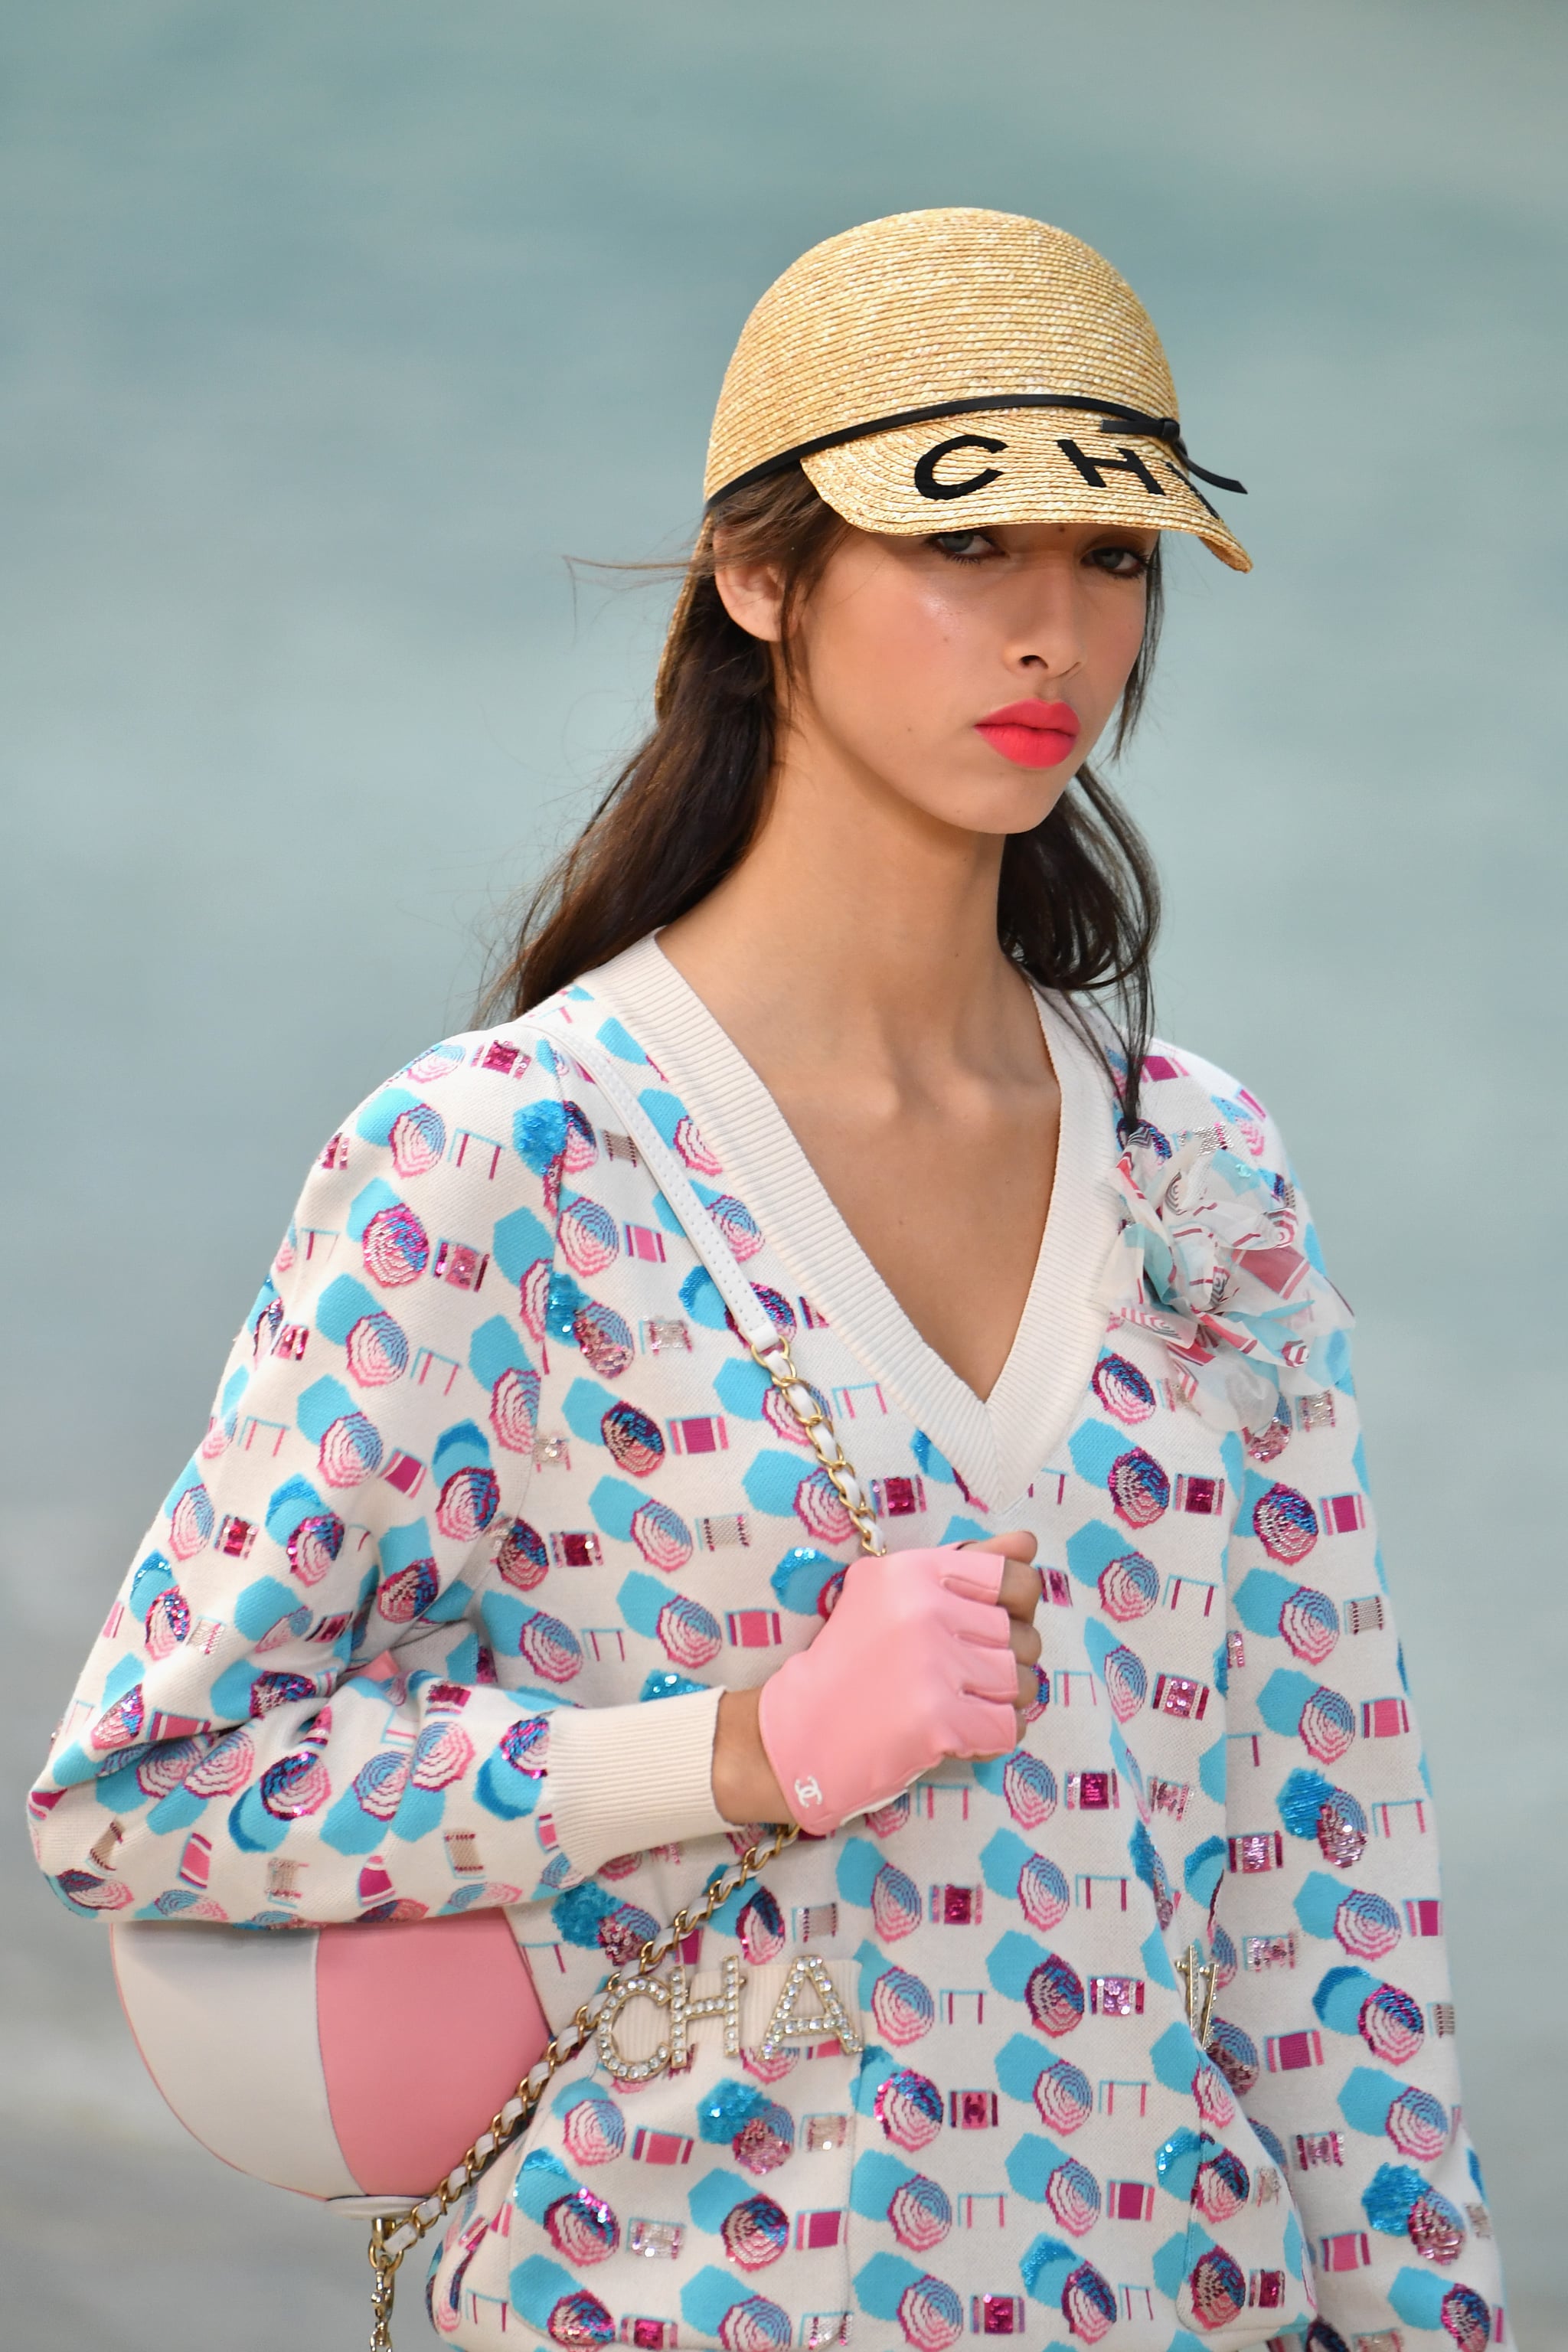 The Chanel Baseball Cap, Nothing Will Excite You Like the Chanel Beach  Ball Bag, Except Maybe the PVC Sandals